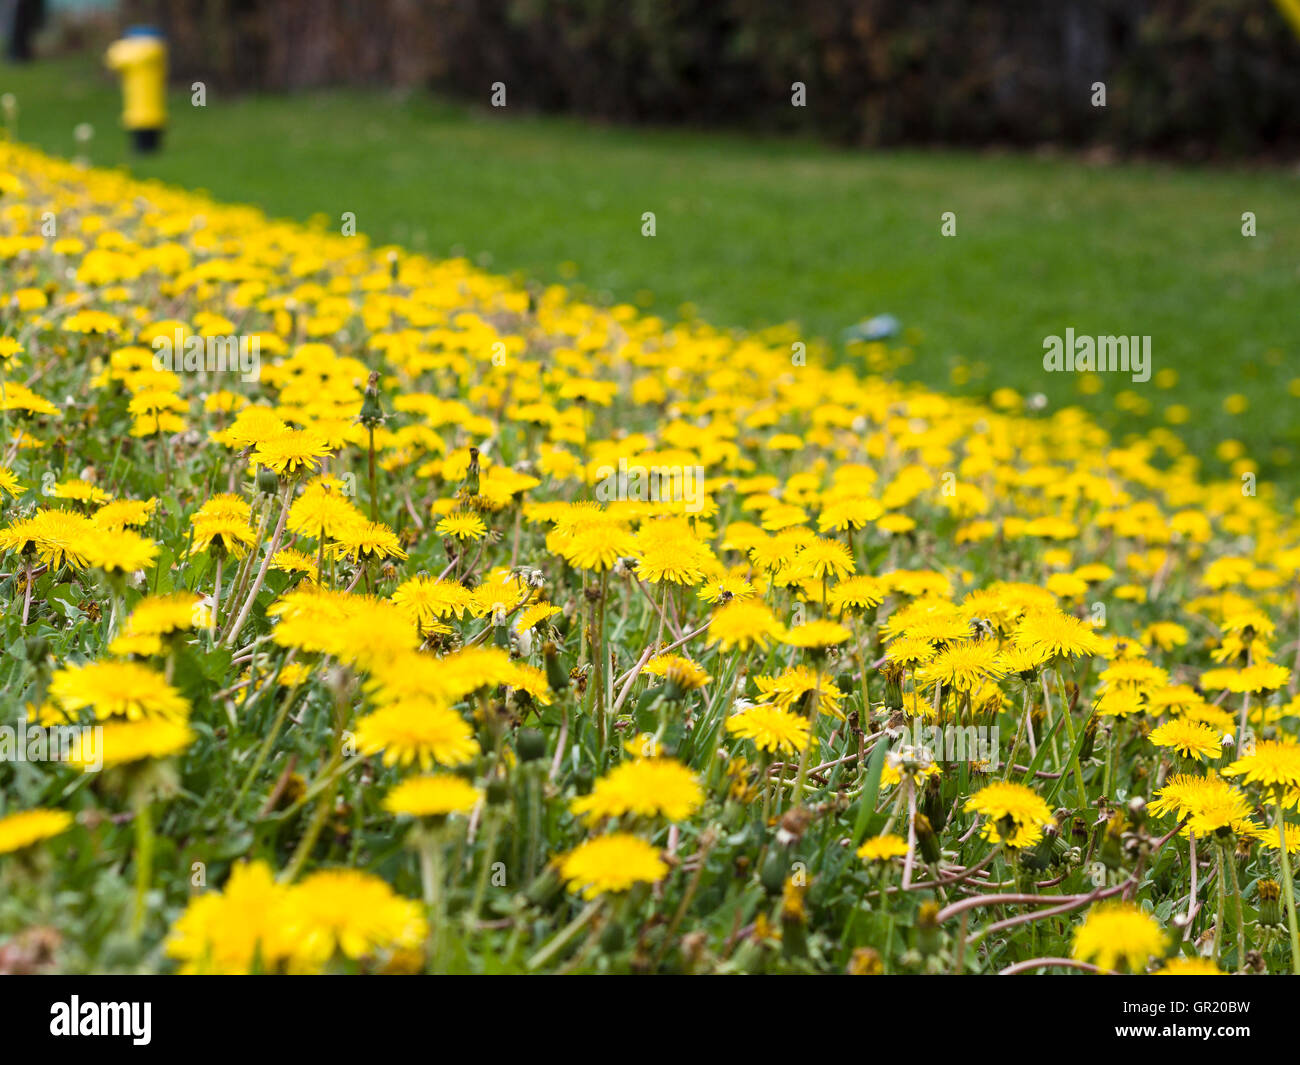 A ditch of dandelion flowers with hydrant. The edge of an Ottawa roadway thick with blooming yellow dandelion flowers. Stock Photo